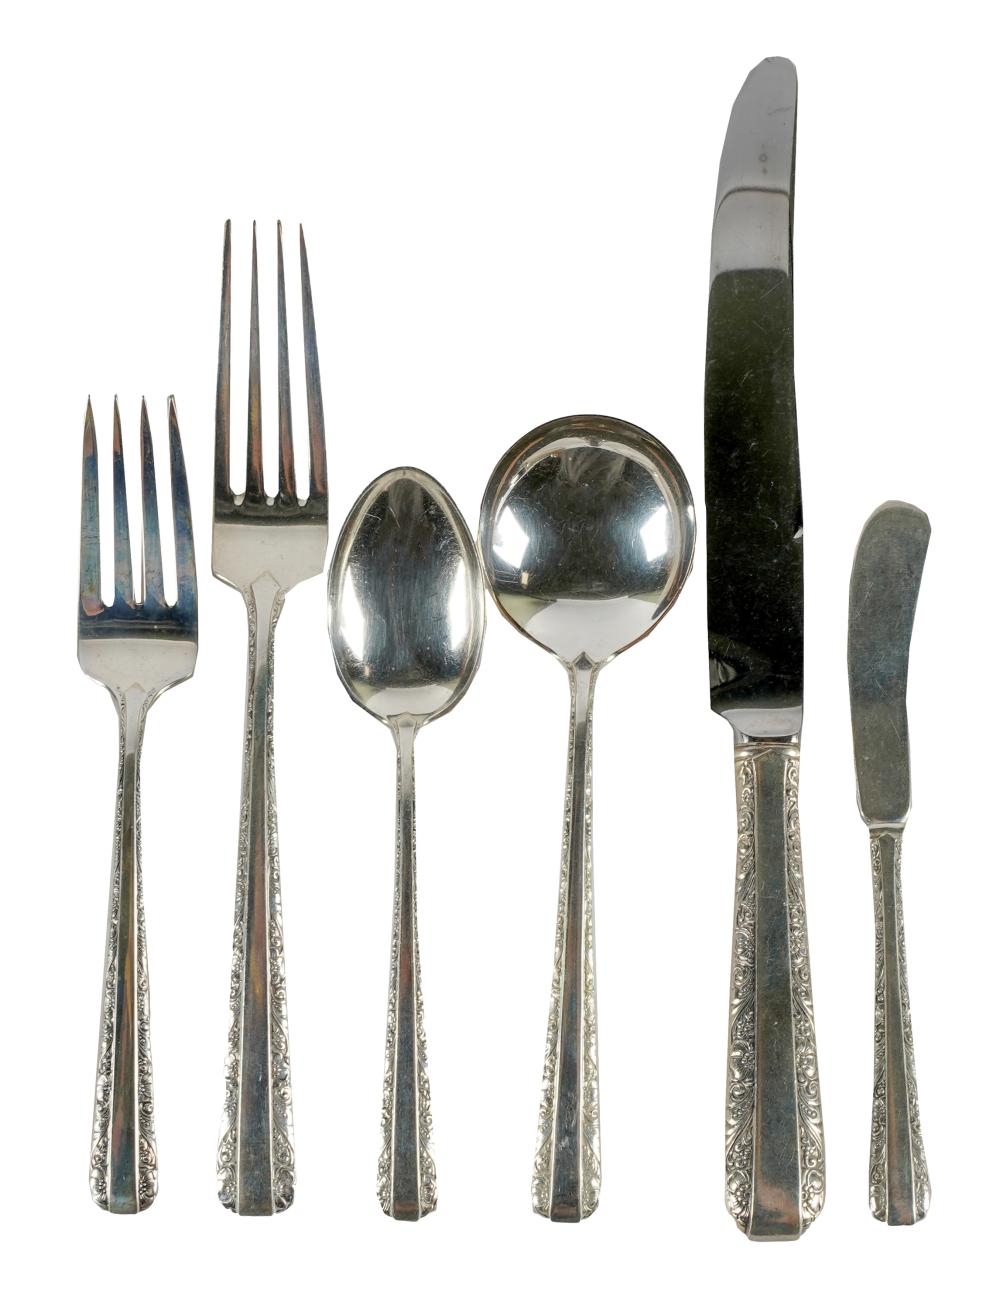 TOWLE "CANDLELIGHT" STERLING FLATWARE